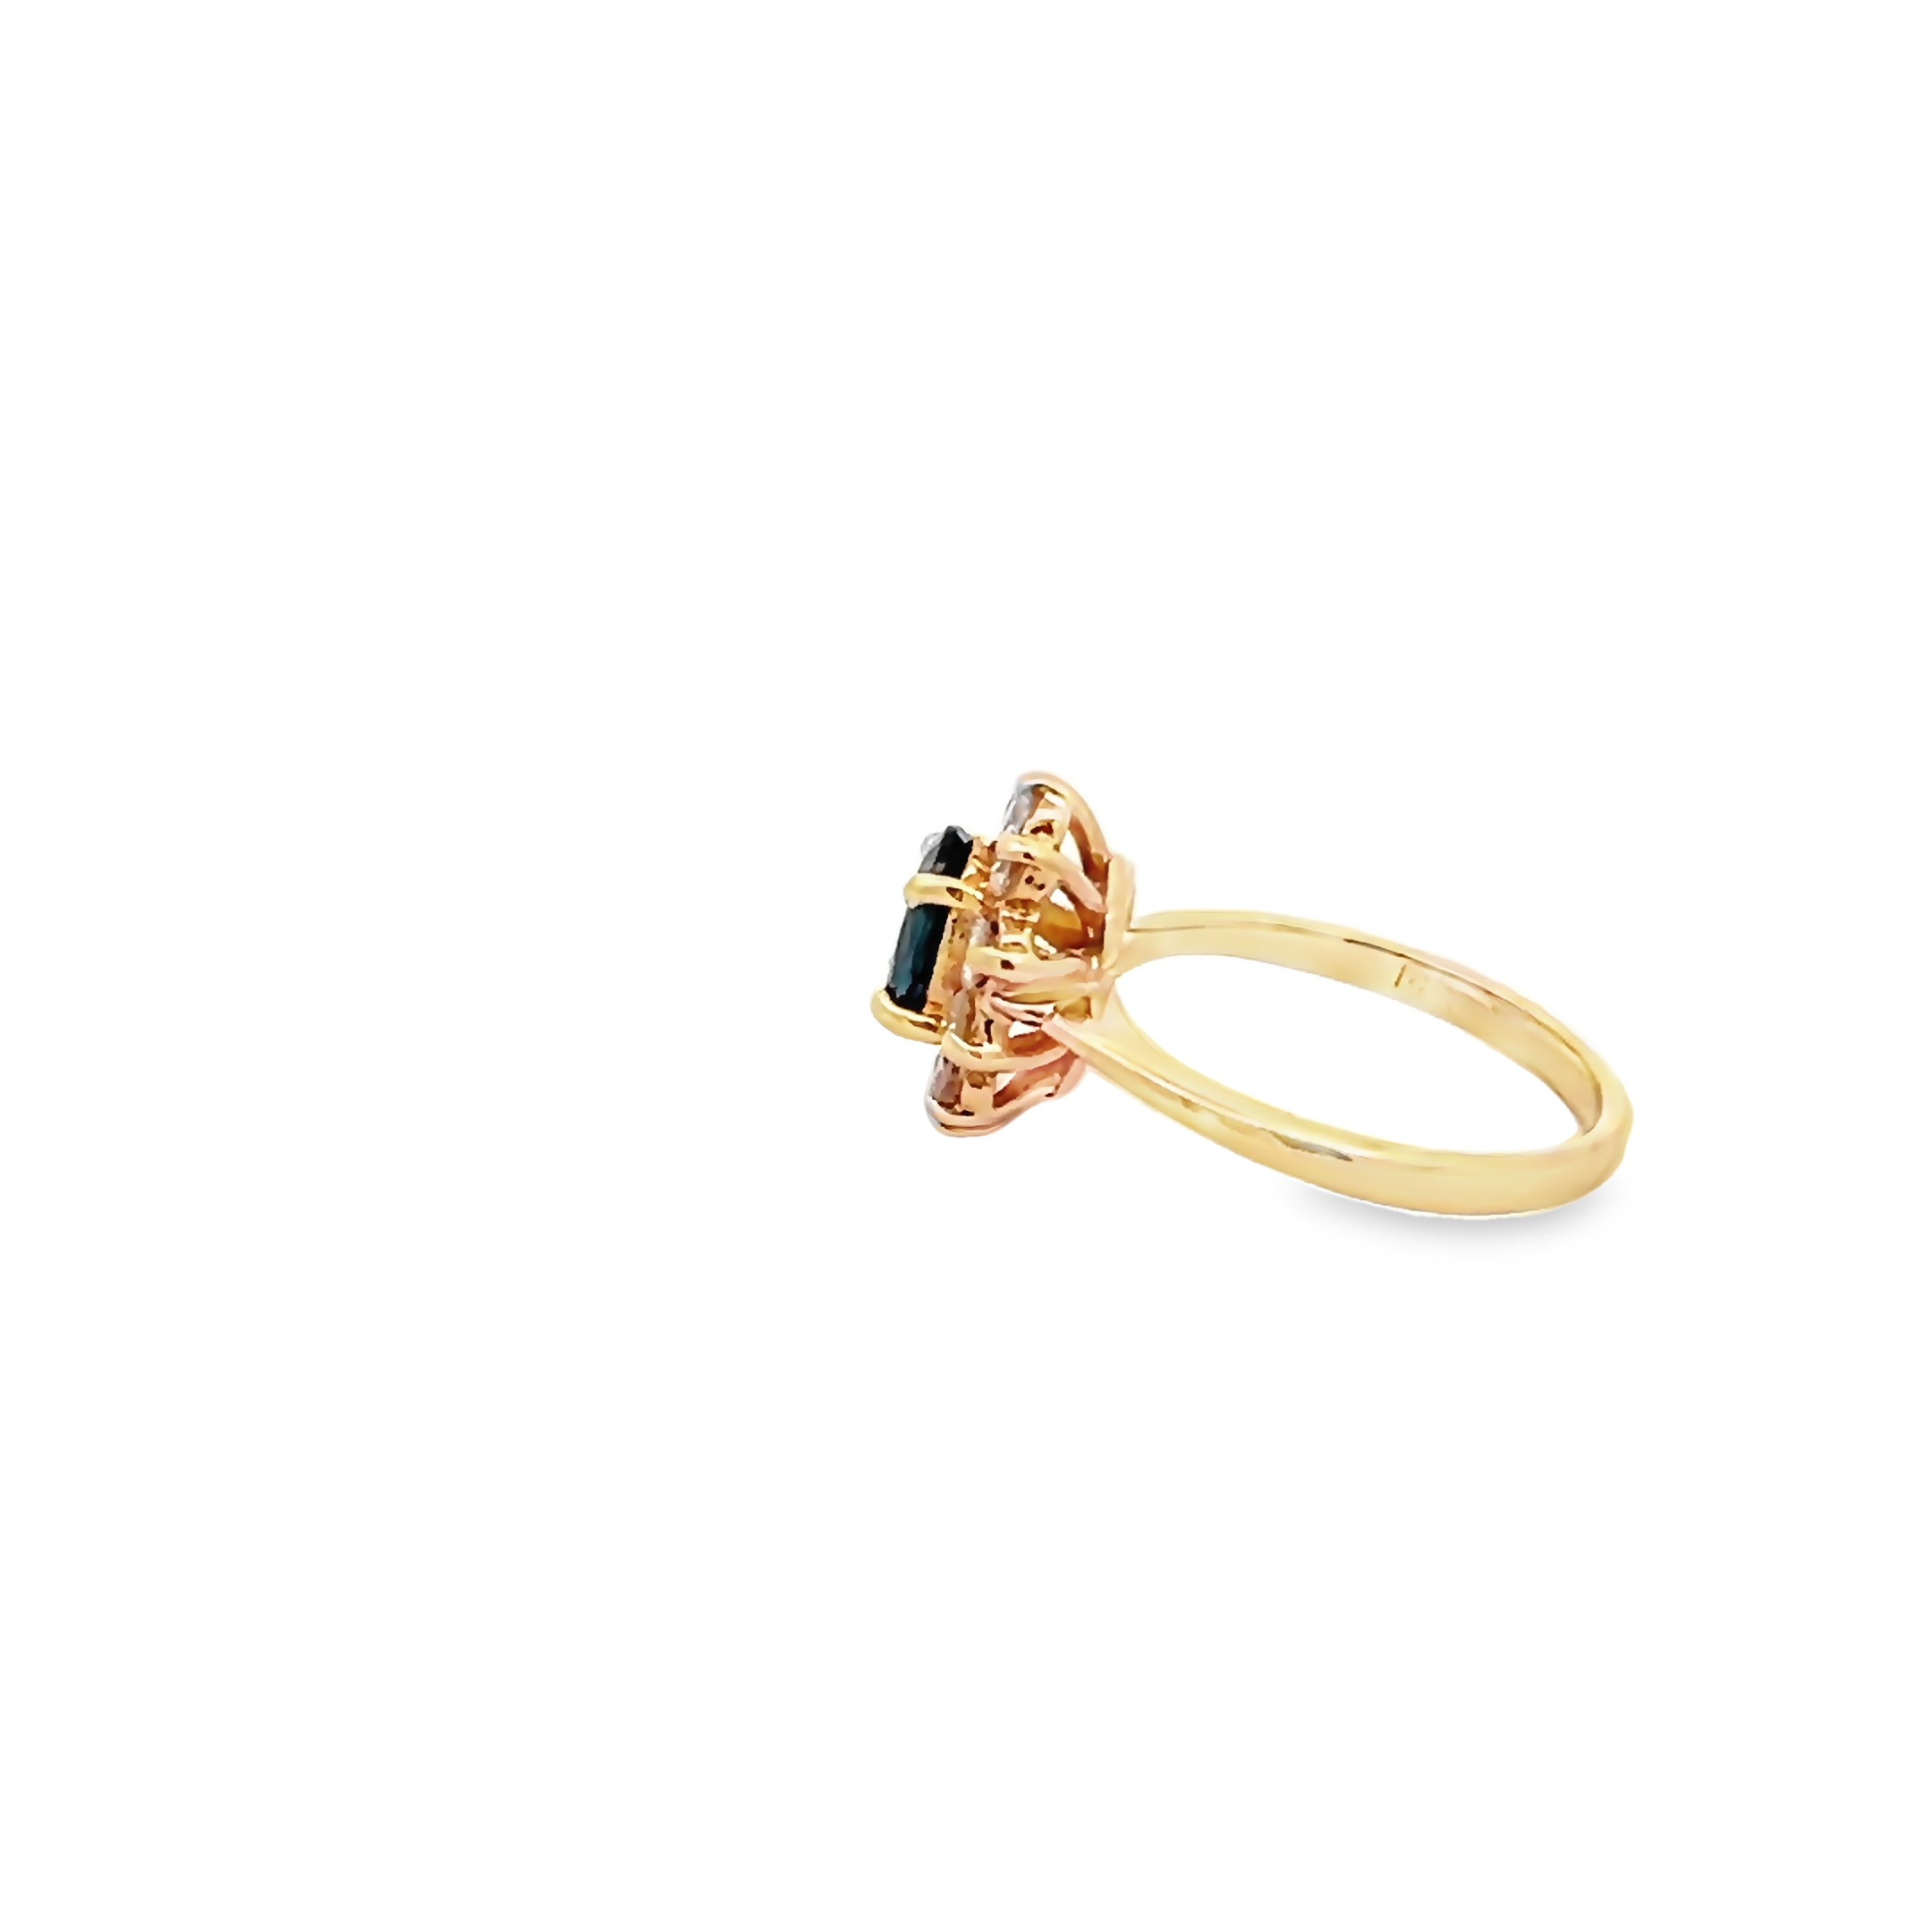 14k Yellow Gold Oval Sapphire With Diamond Halo Ring